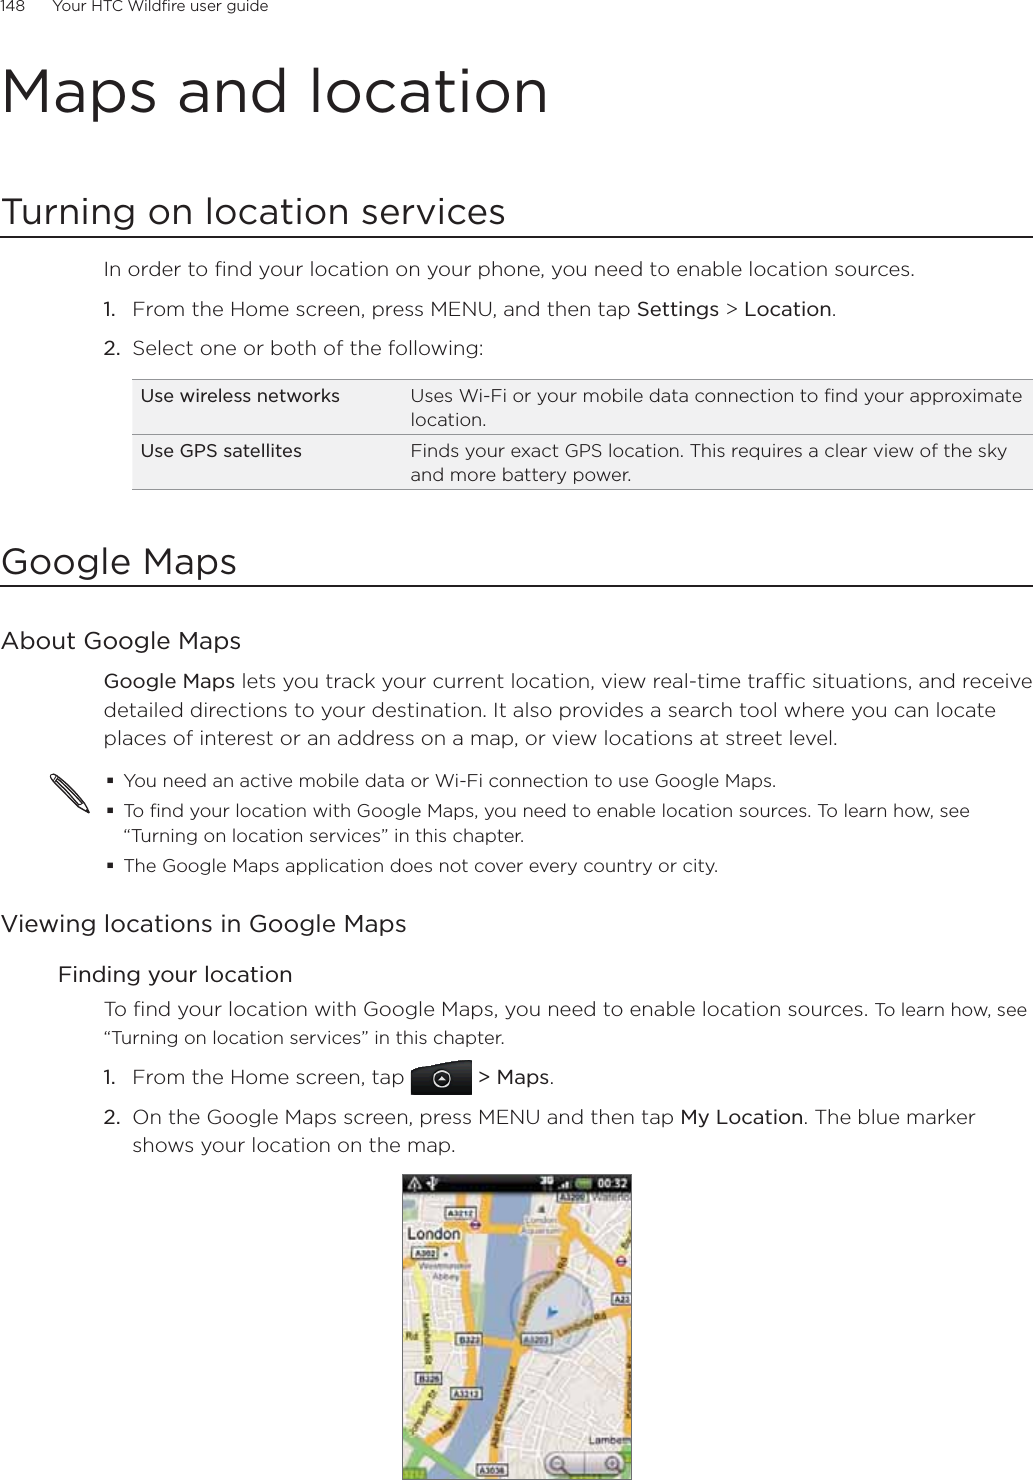 148      Your HTC Wildfire user guide      Maps and locationTurning on location servicesIn order to find your location on your phone, you need to enable location sources.From the Home screen, press MENU, and then tap Settings &gt; Location.Select one or both of the following:Use wireless networks Uses Wi-Fi or your mobile data connection to find your approximate location.Use GPS satellites Finds your exact GPS location. This requires a clear view of the sky and more battery power.Google MapsAbout Google MapsGoogle Maps lets you track your current location, view real-time traffic situations, and receive detailed directions to your destination. It also provides a search tool where you can locate places of interest or an address on a map, or view locations at street level.You need an active mobile data or Wi-Fi connection to use Google Maps.To find your location with Google Maps, you need to enable location sources. To learn how, see “Turning on location services” in this chapter.The Google Maps application does not cover every country or city.Viewing locations in Google MapsFinding your locationTo find your location with Google Maps, you need to enable location sources. To learn how, see “Turning on location services” in this chapter.From the Home screen, tap   &gt; Maps.On the Google Maps screen, press MENU and then tap My Location. The blue marker shows your location on the map.1.2.1.2.